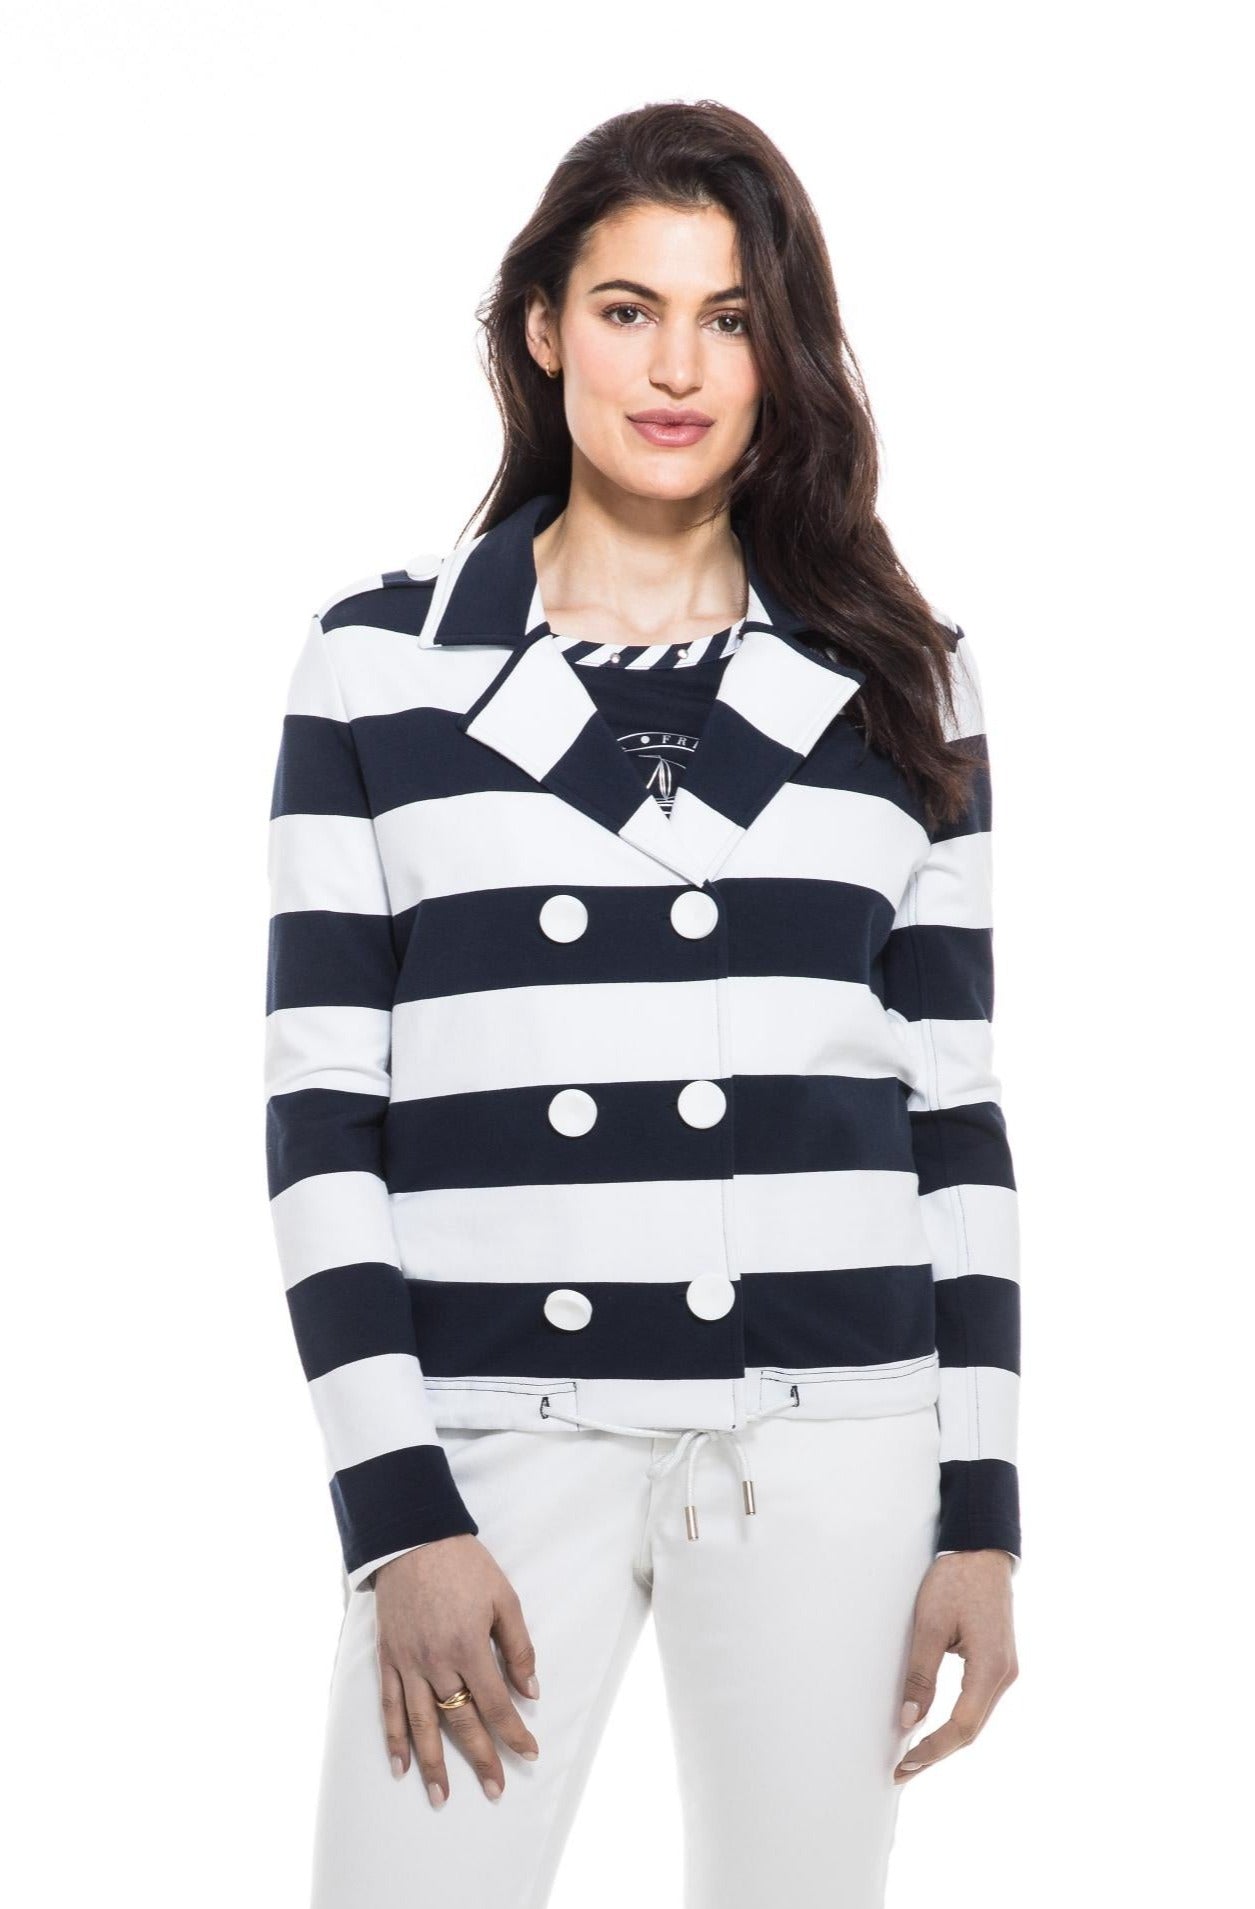 Striped Jacket Orly Apparel